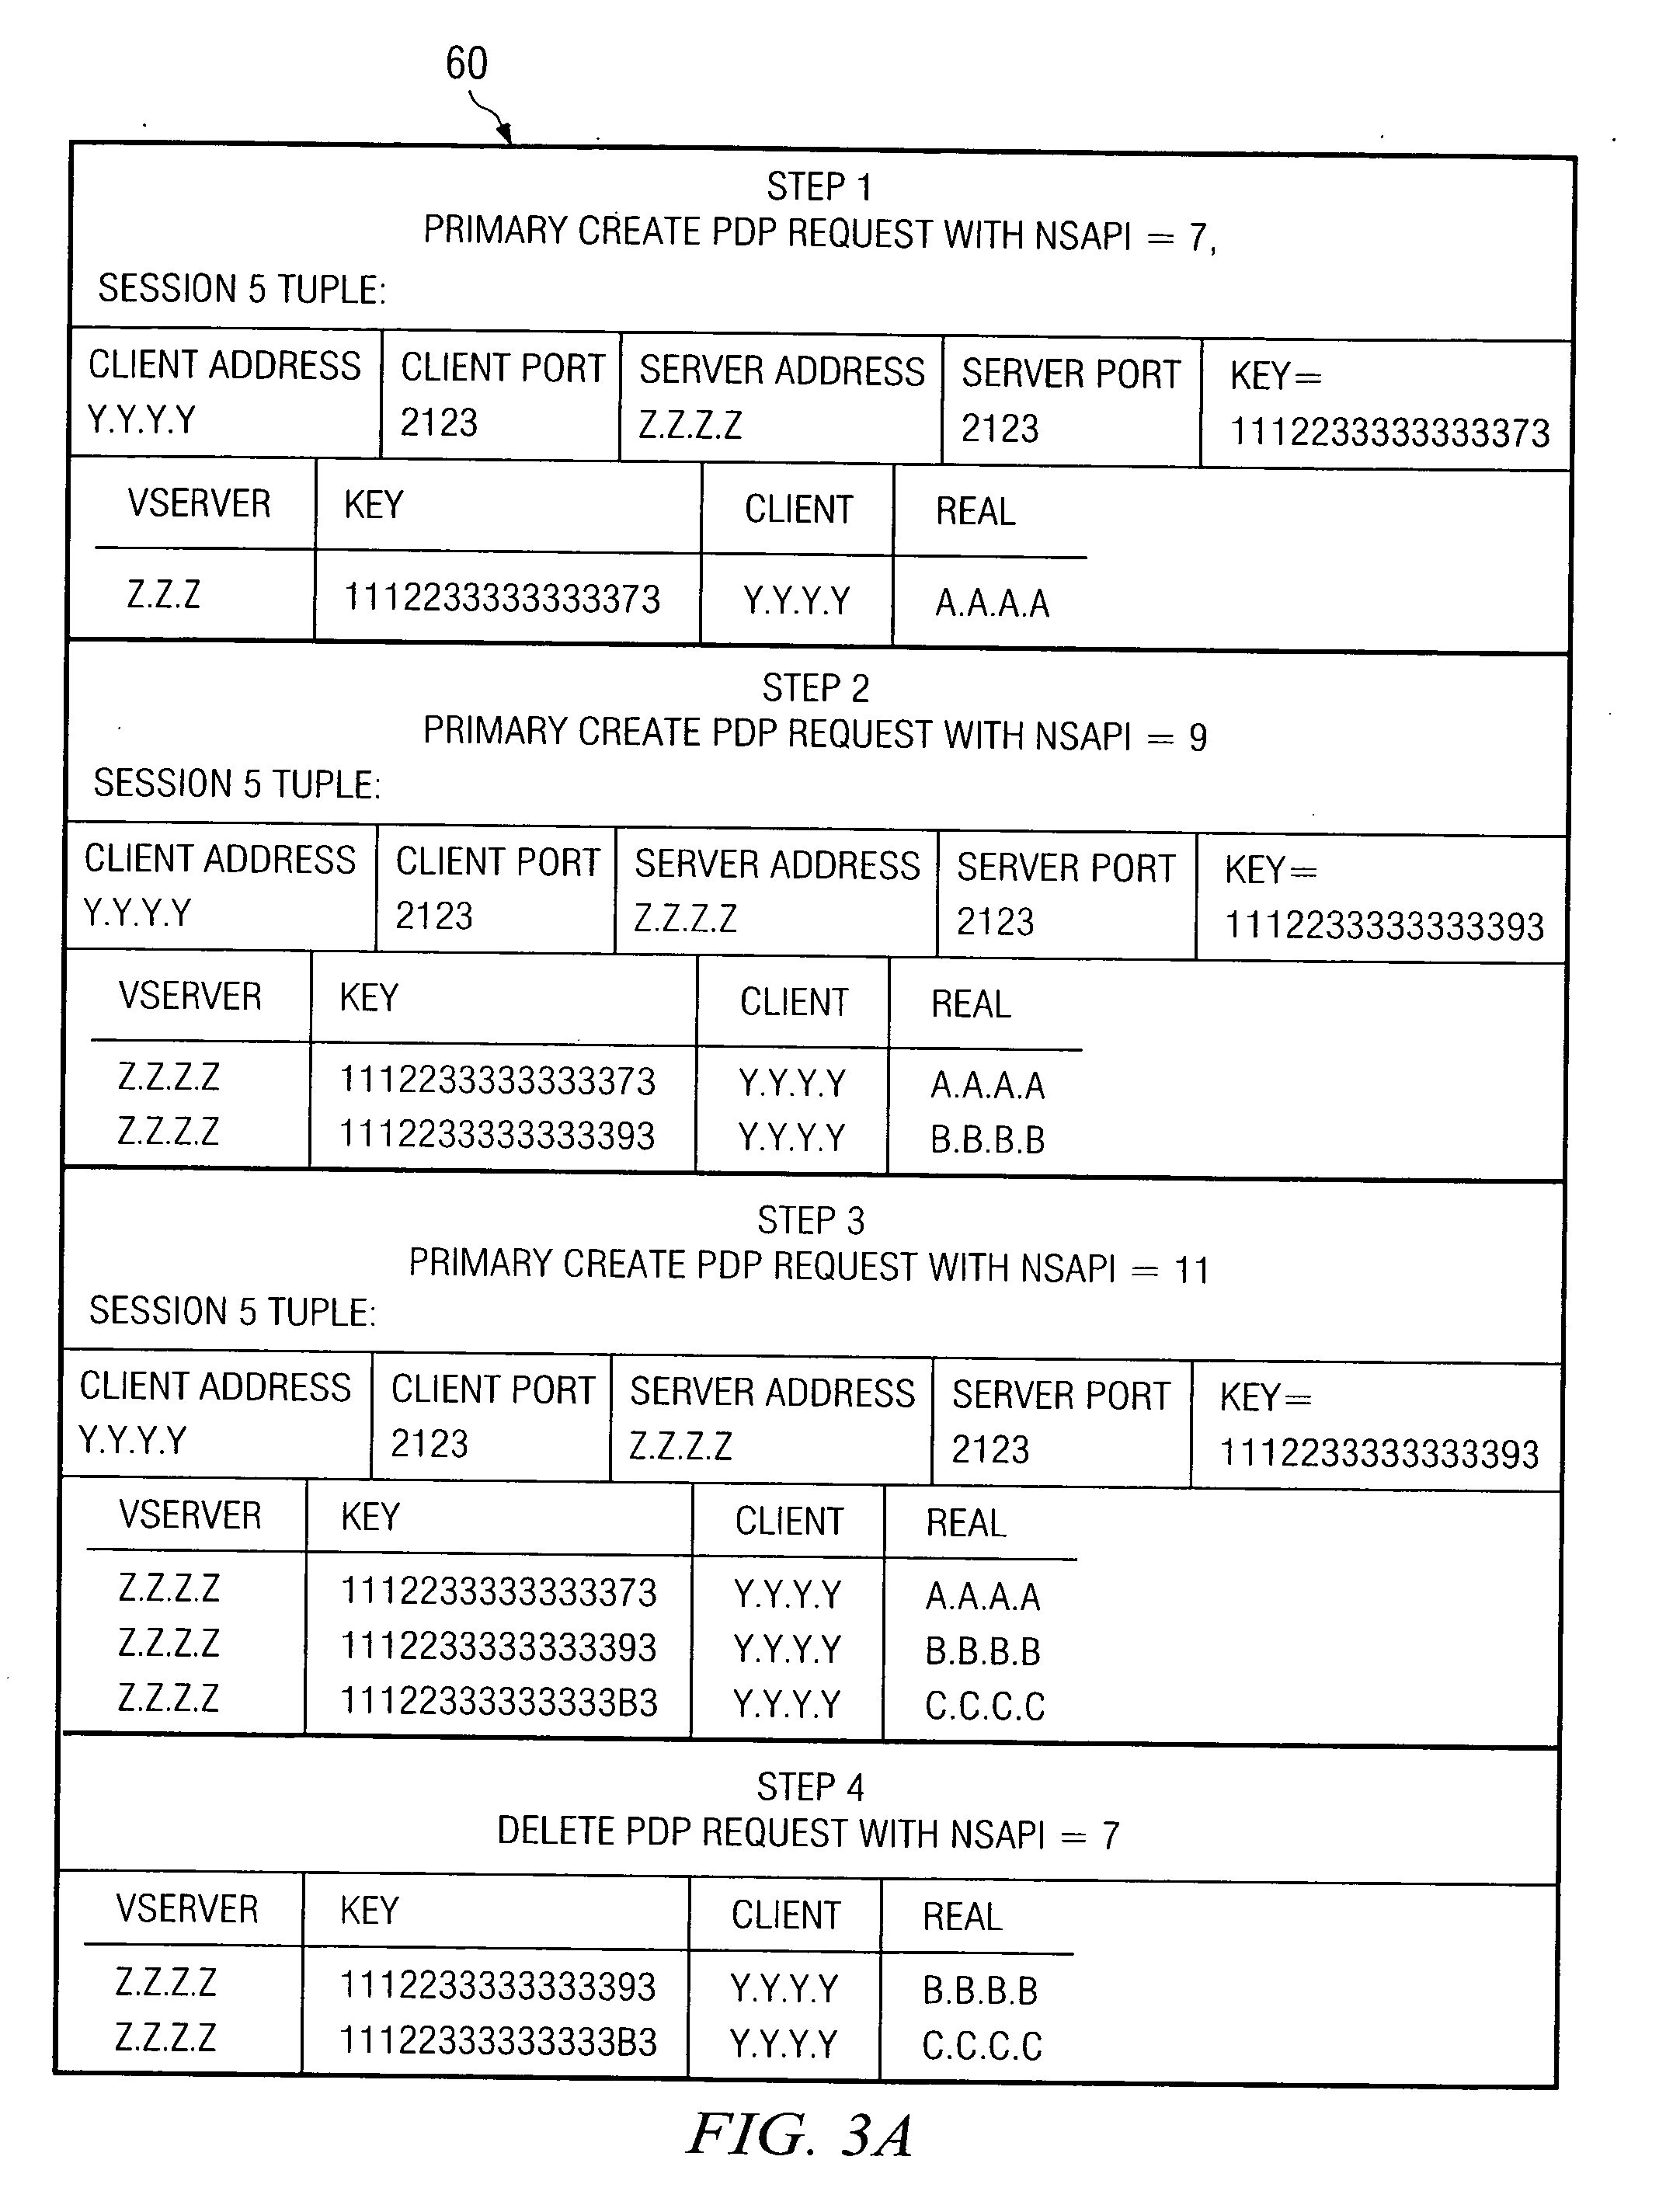 System and method for optimizing sessions and network resources in a loadbalancing environment